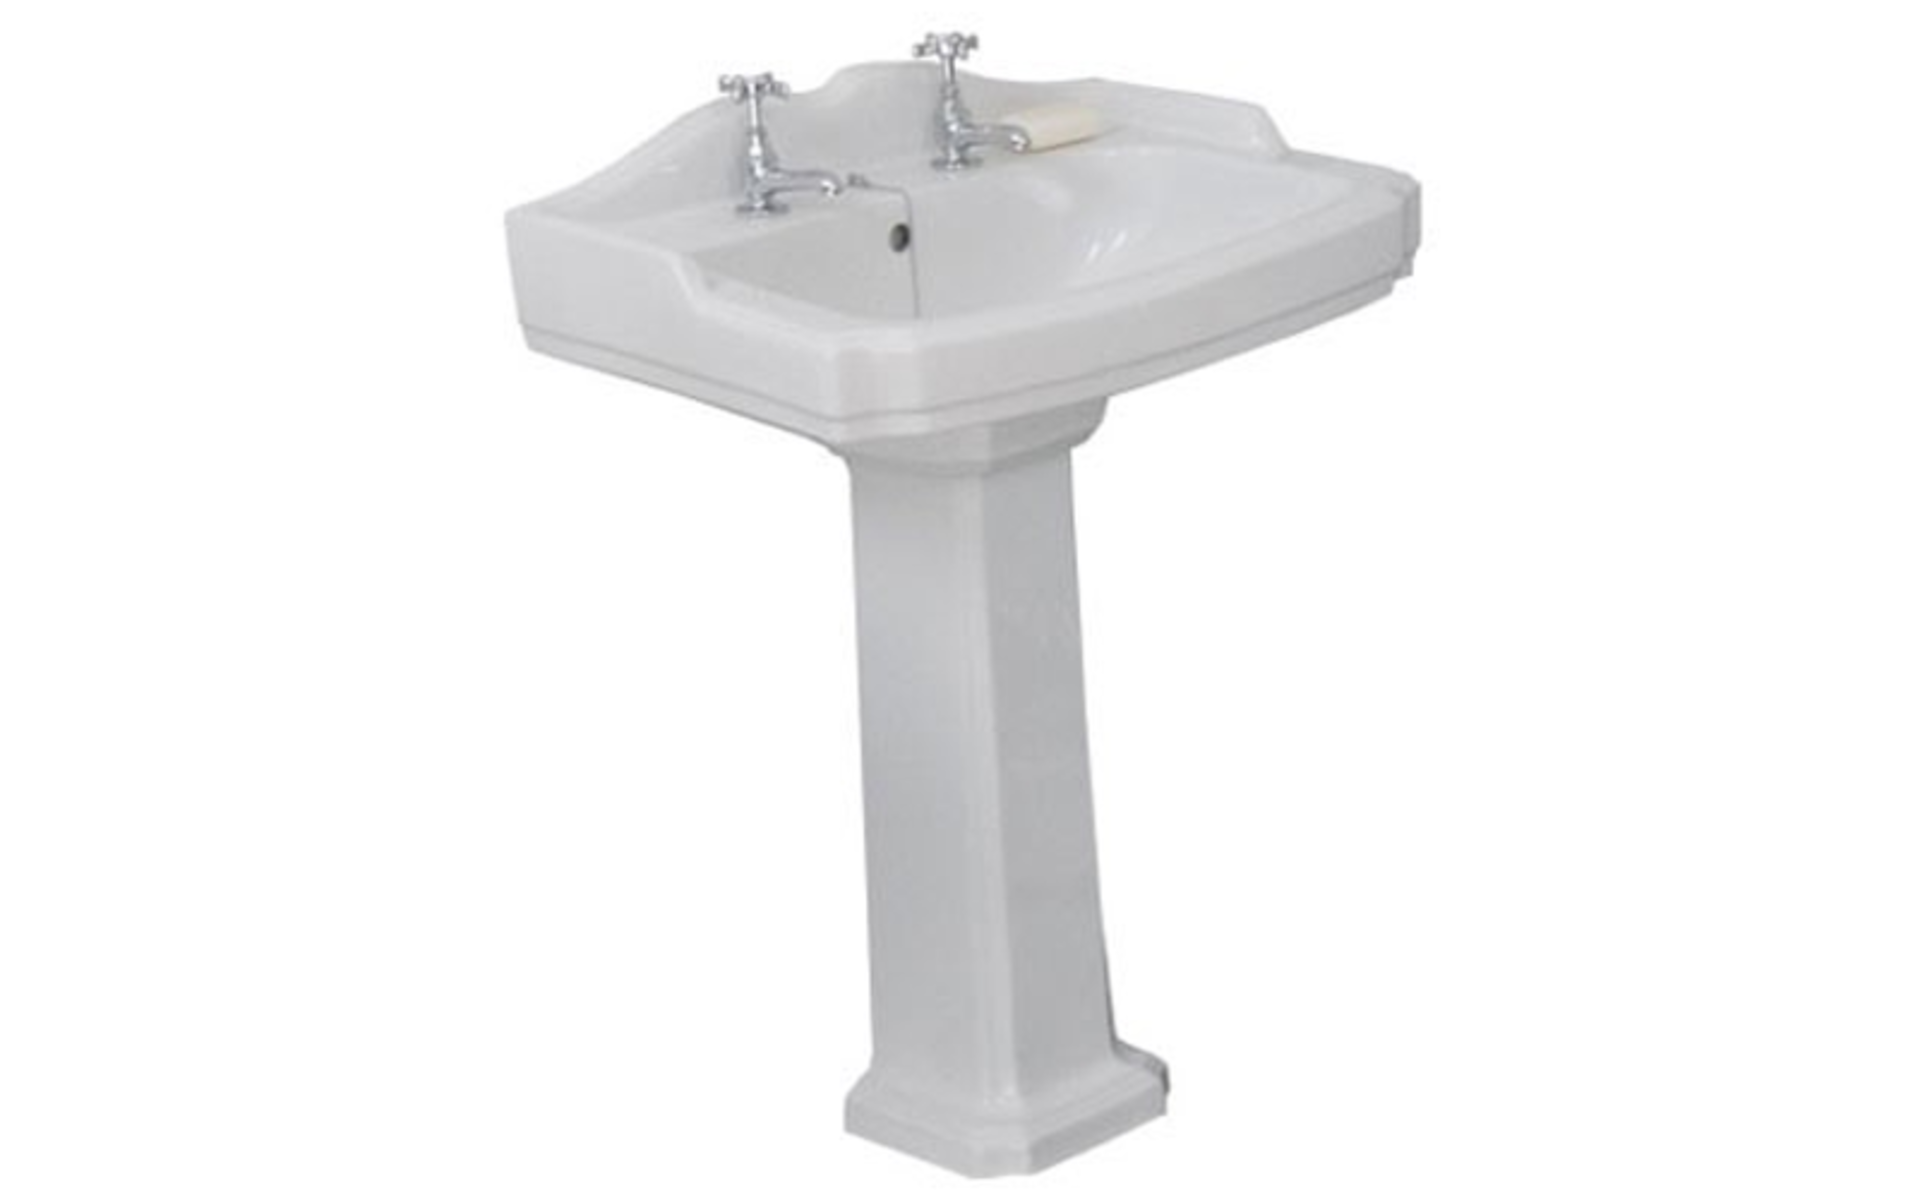 1 x Legend Two Tap Hole Sink Basin With Pedestal - H835 x W580 x D470 cms - CL406- New Boxed Stock - - Image 3 of 3